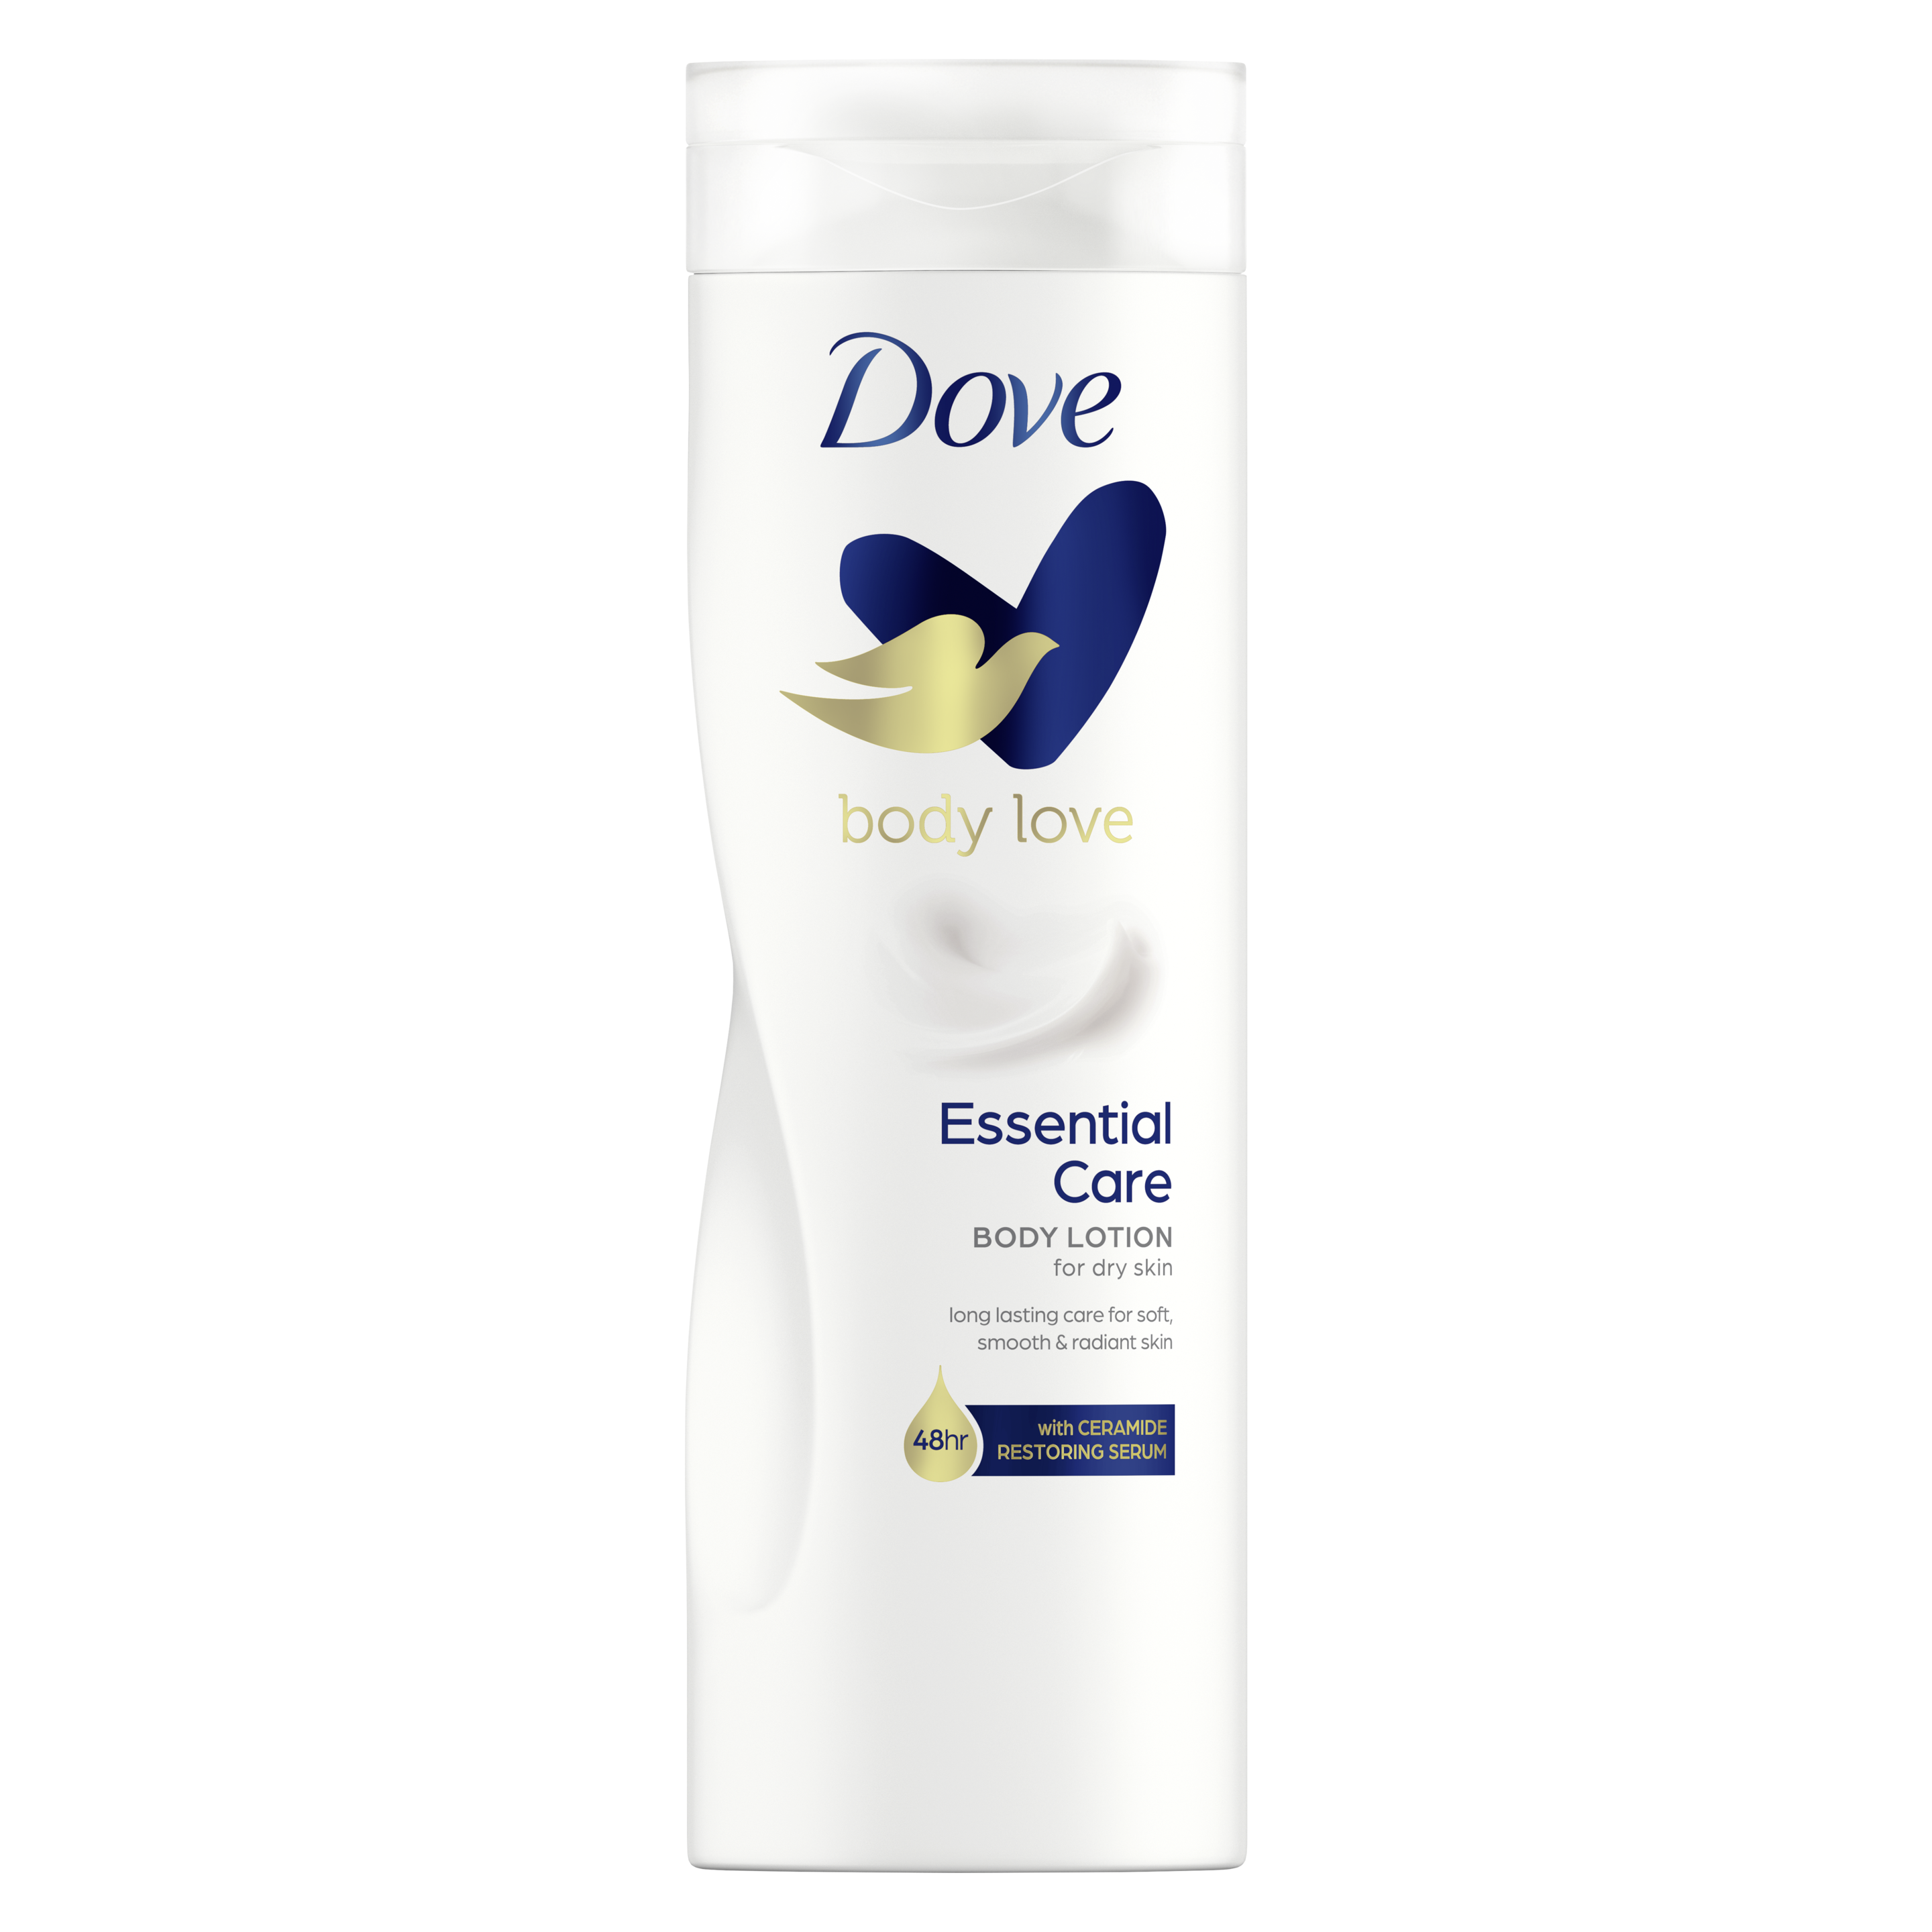 Dove Body Love Essential Care Body Lotion for Dry Skin 400ml